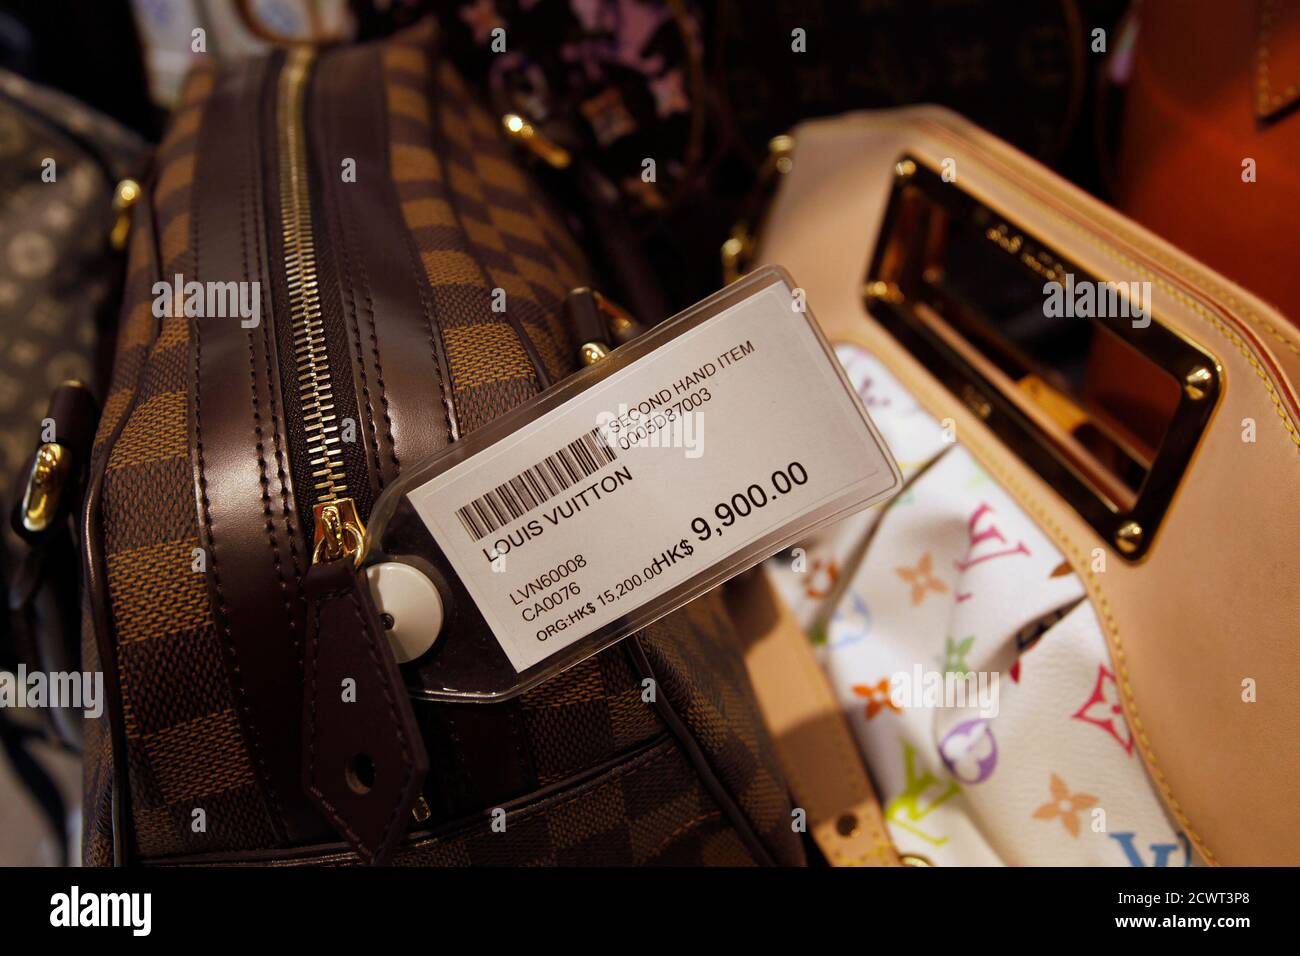 Page 2 - Gucci Outlet High Resolution Stock Photography Images - Alamy